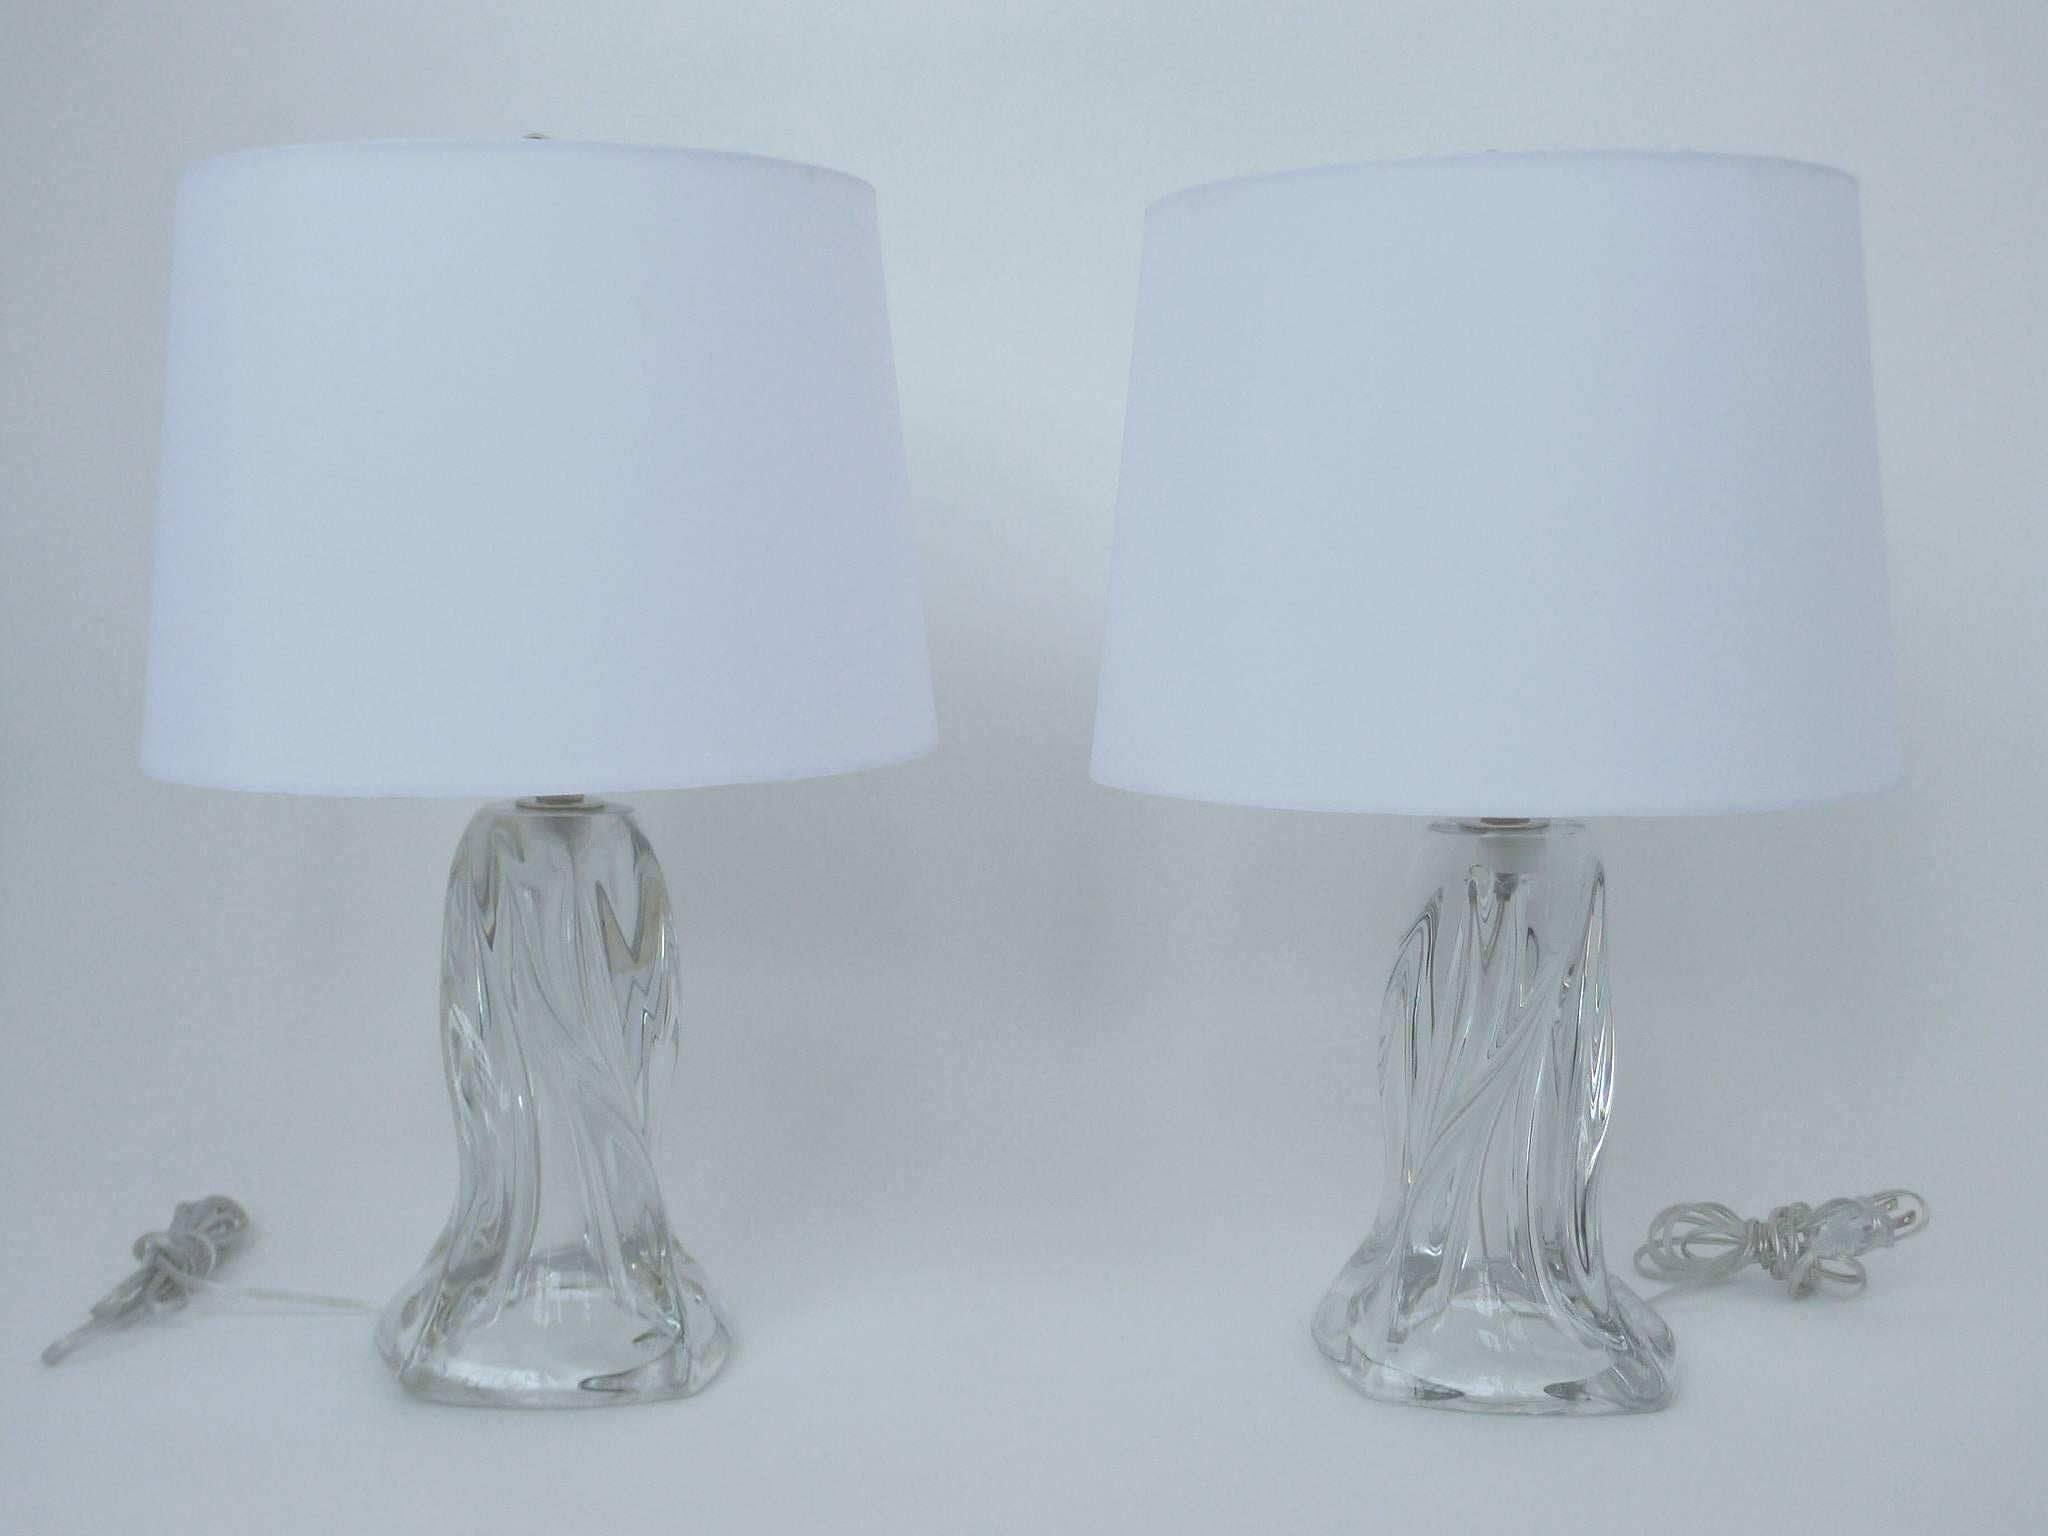 These table lamps are transparent, handblown Murano glass. They're beautifully made with a dynamic spiralling shape. The lamps are newly rewired with new chrome hardware and paired with new white silk shades from tailor made. 

Measures: 20.75 in.